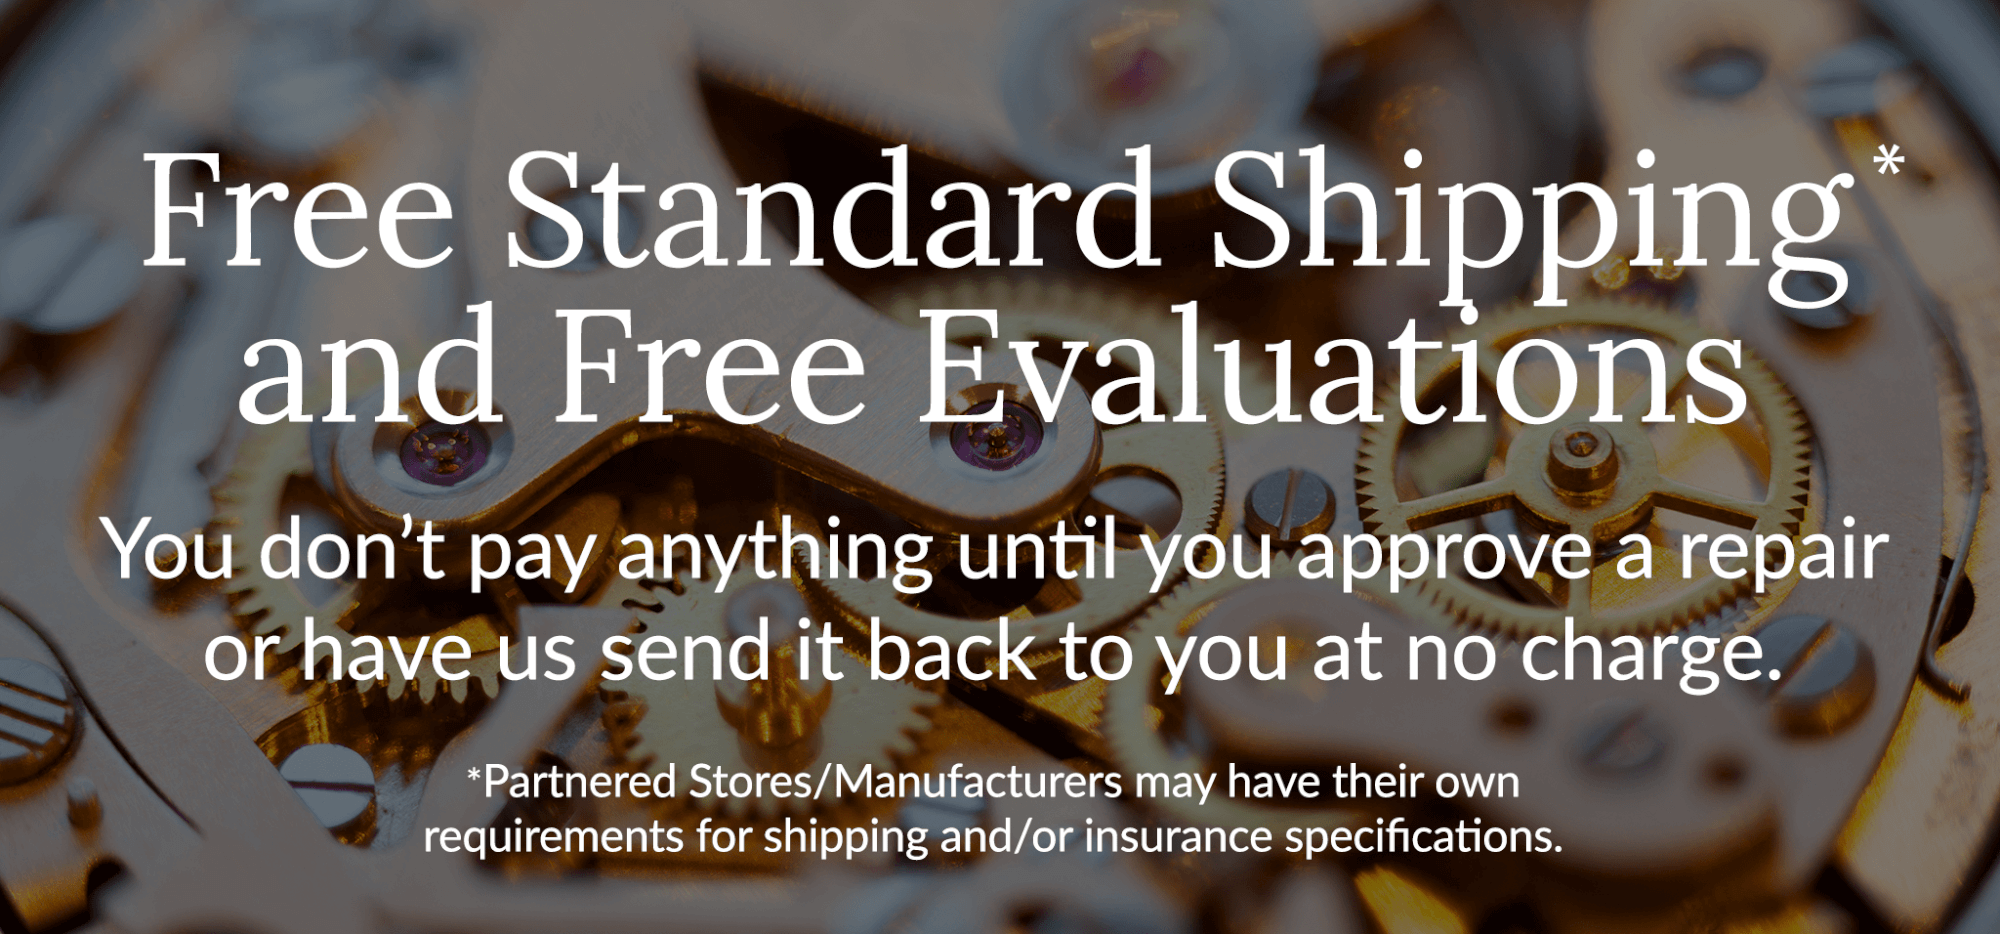 Banner Showing Free Evaluations & Shipping for Online Watch Repair by Mail